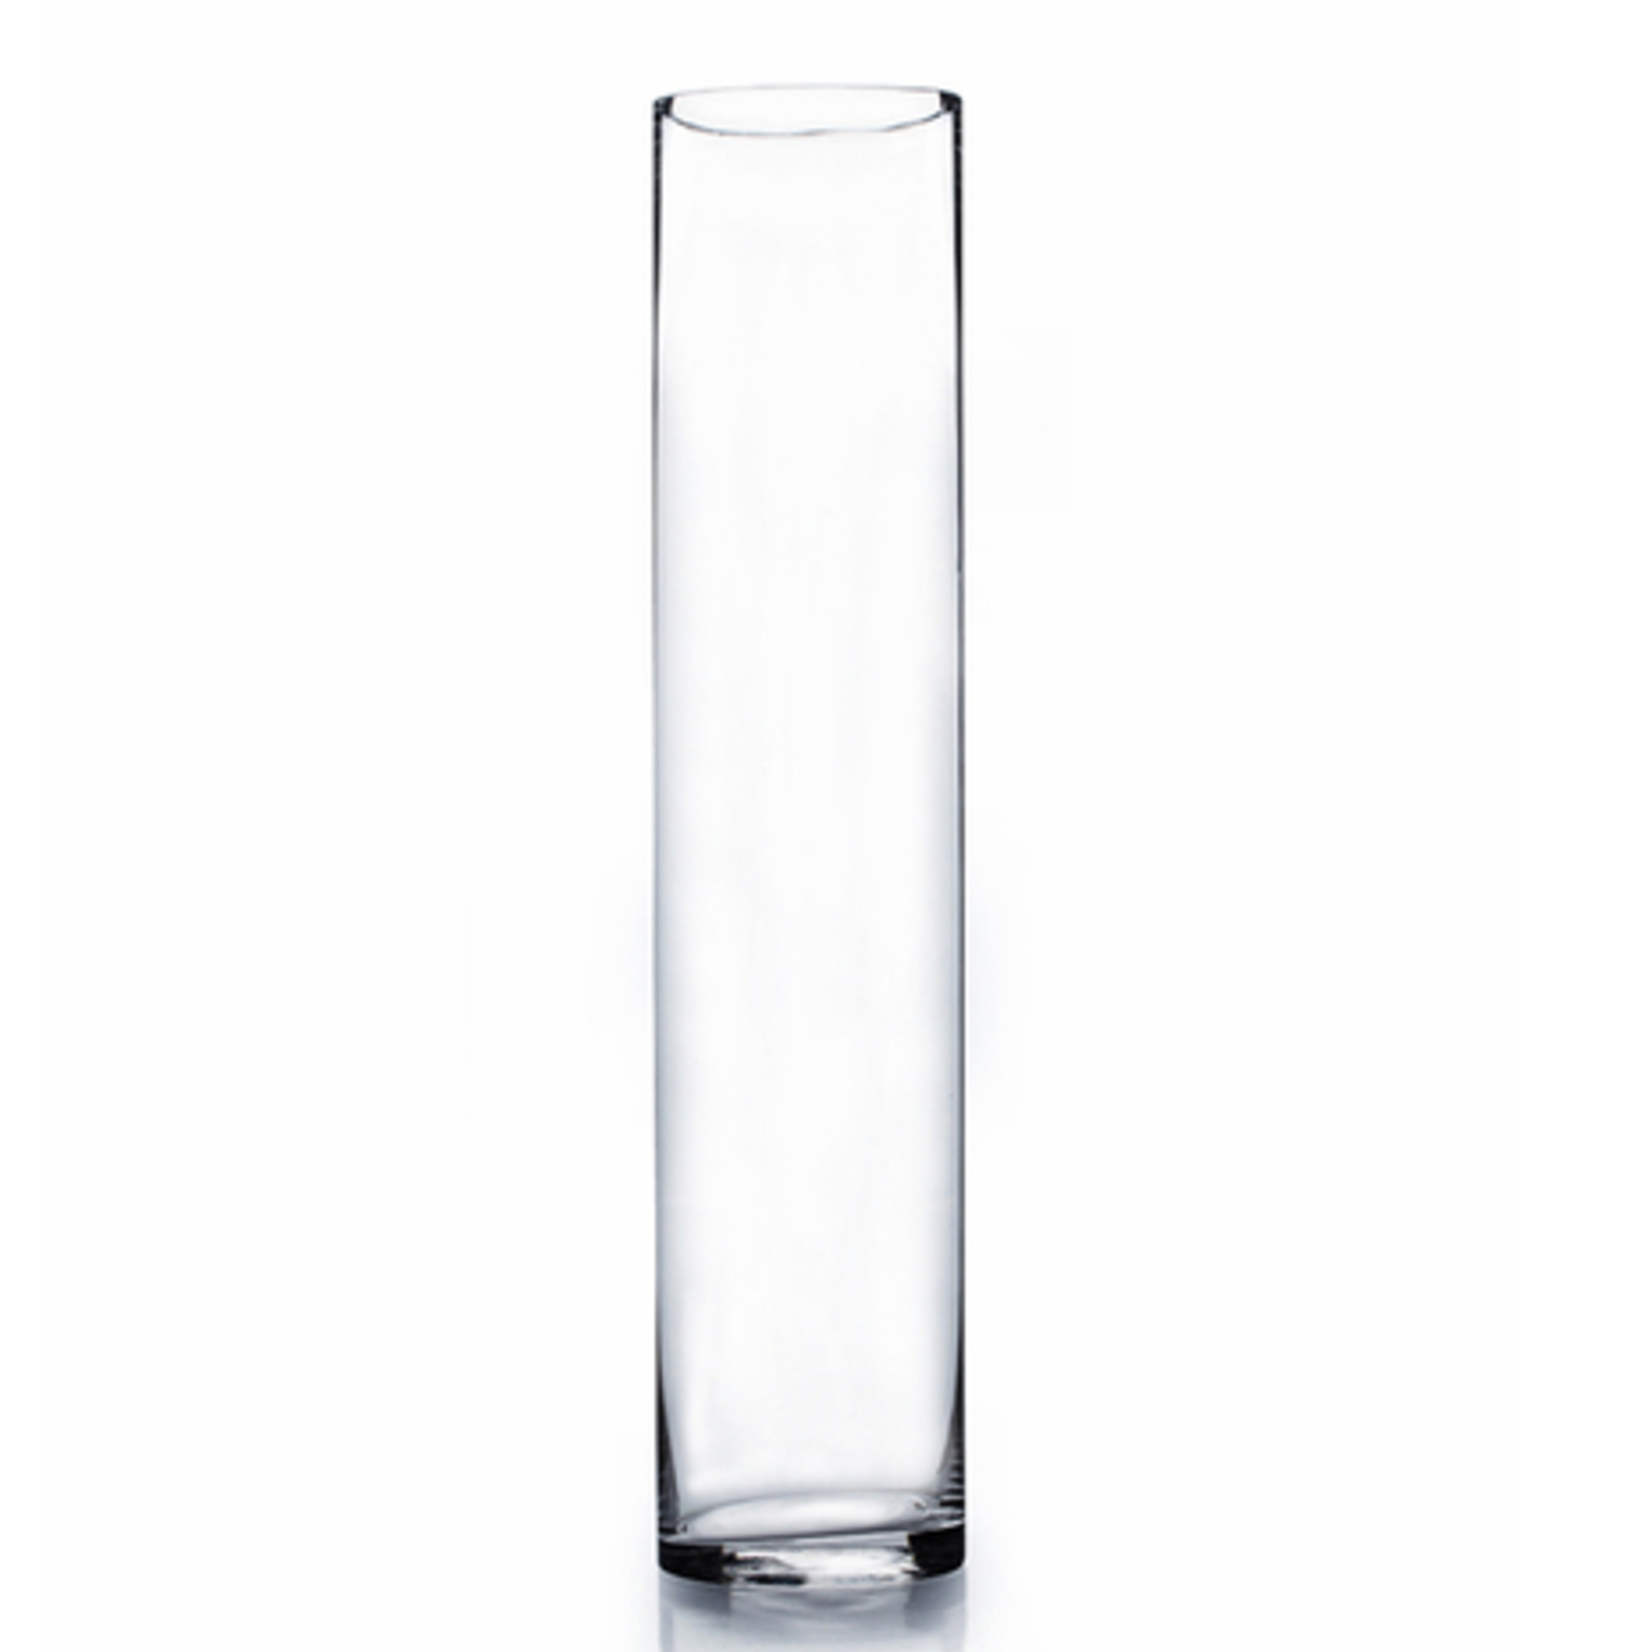 18"H X 4" CLEAR GLASS CYLINDER VASE